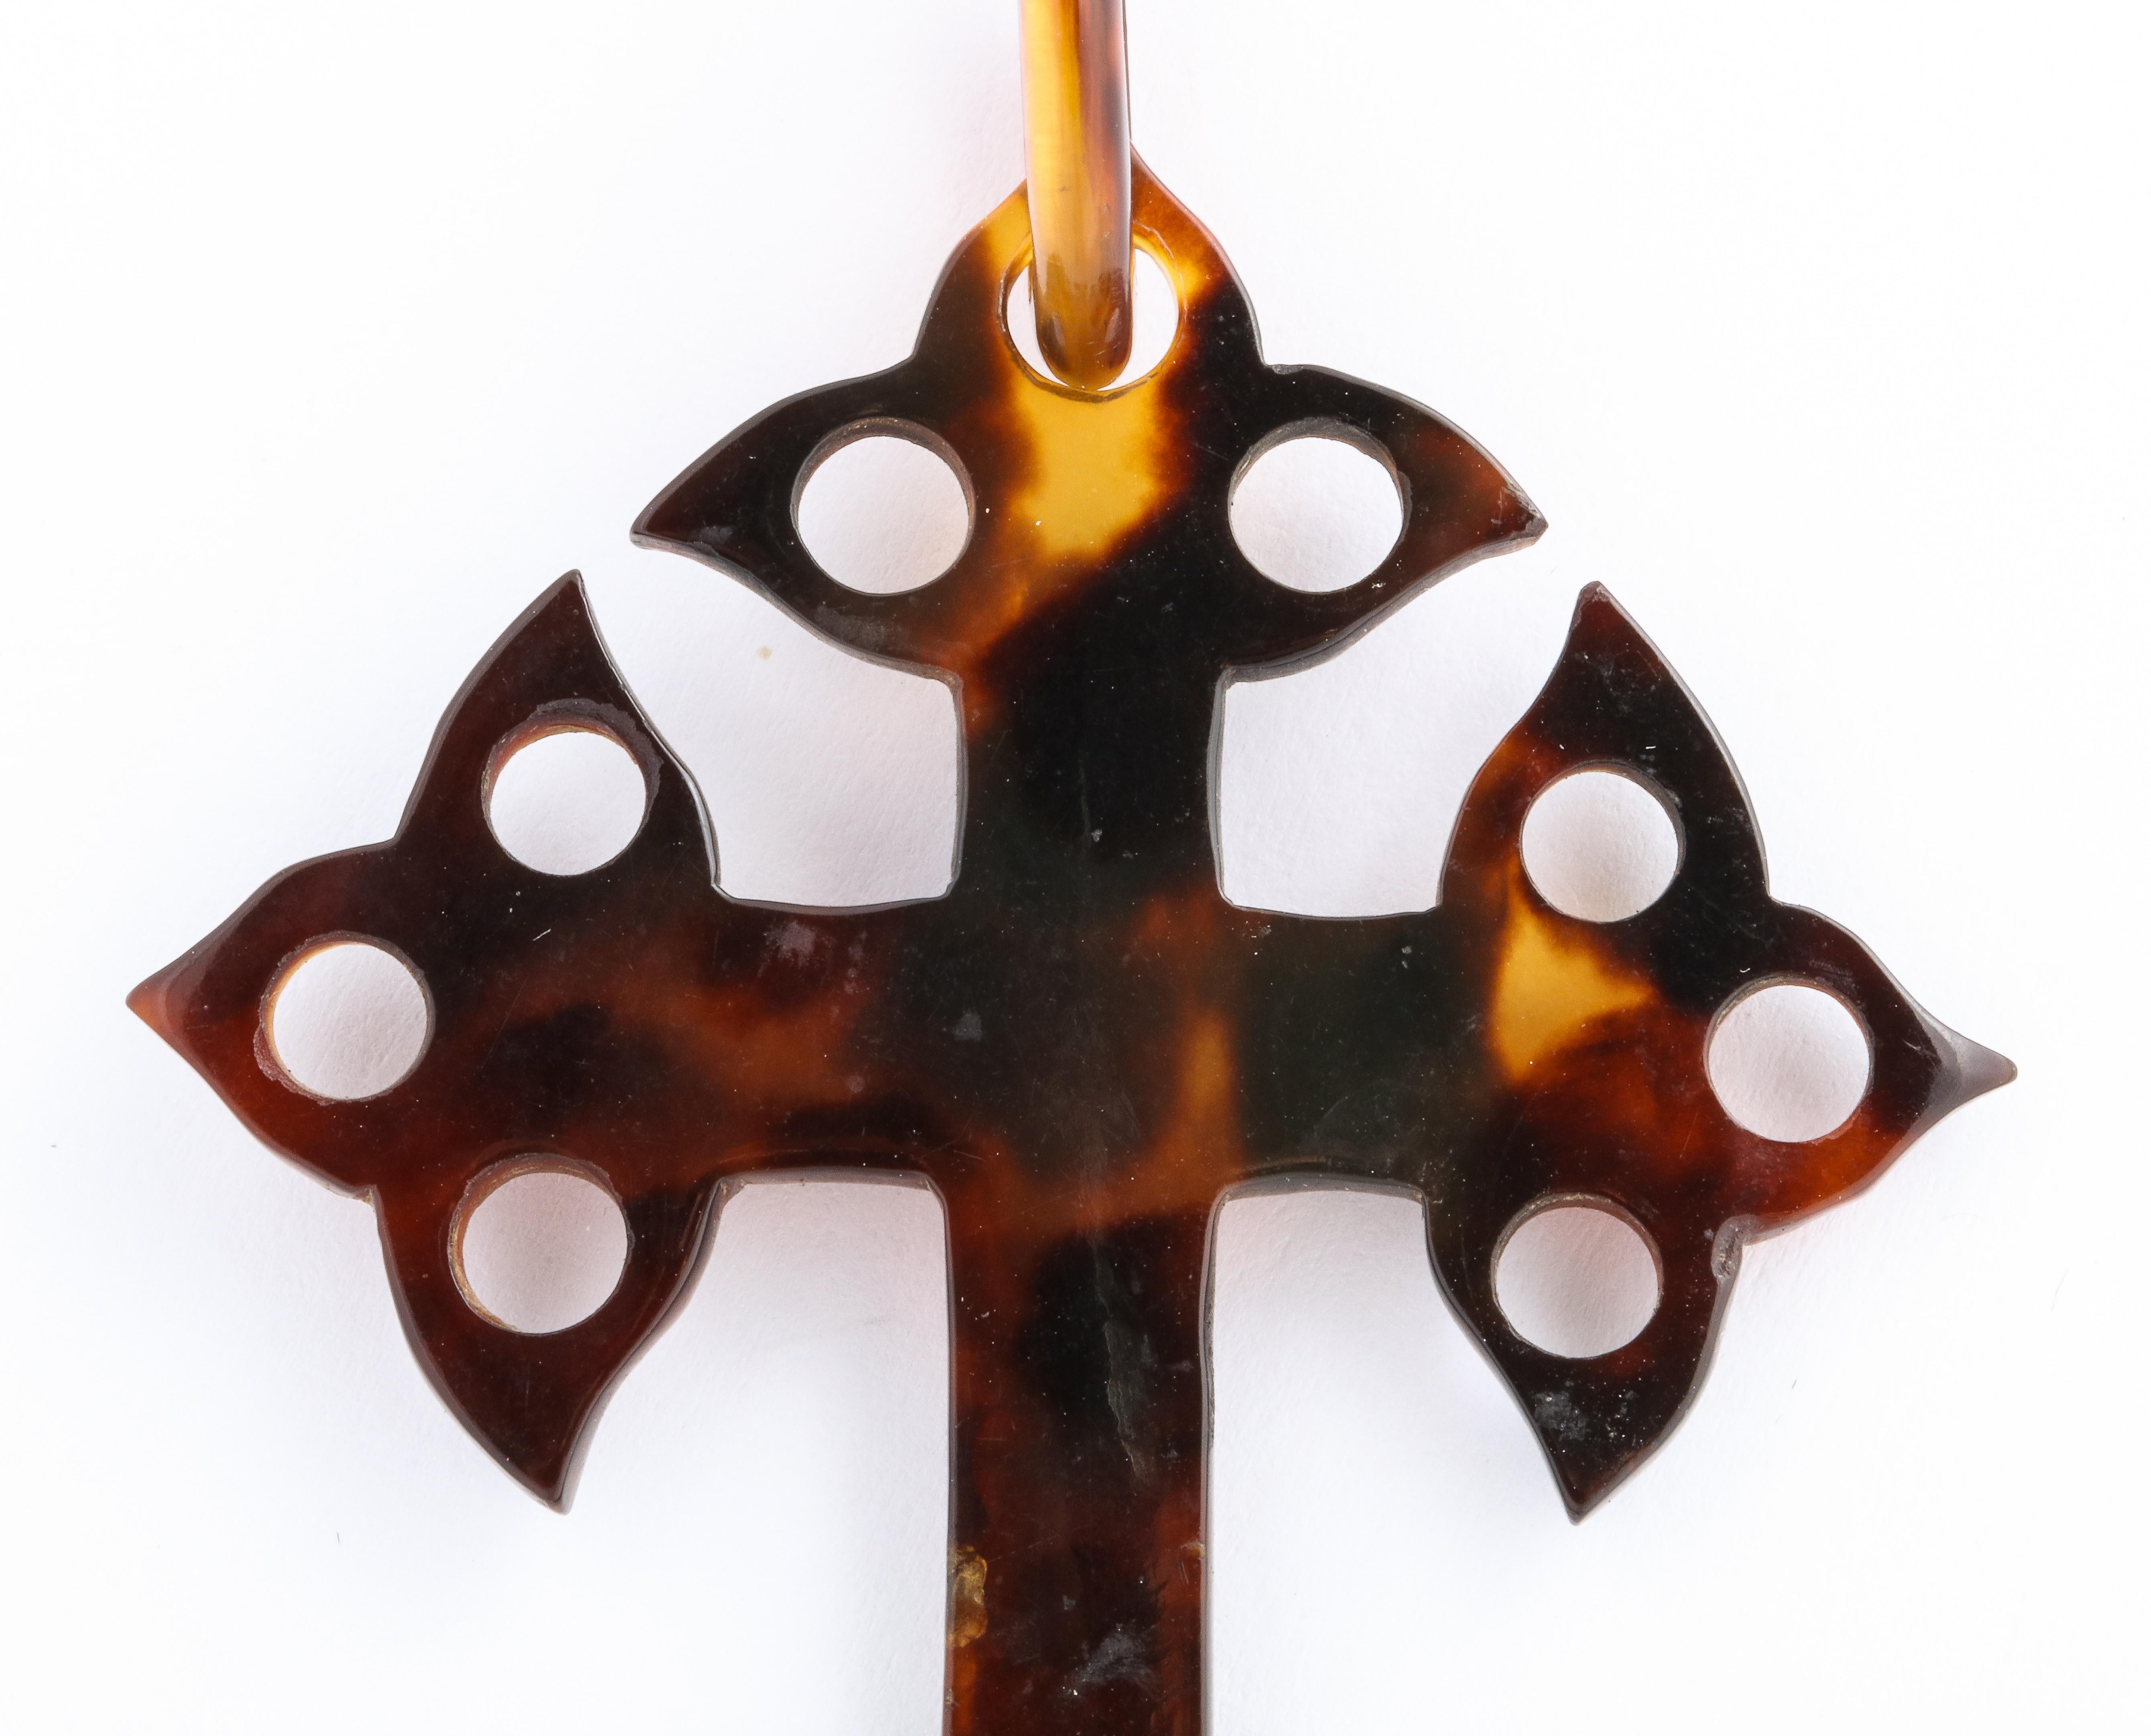 Amazing, think of it, how this tortoise shell cross is carved with circles cut away and even the loop cut out with a crack. The cross has survived and reaches us in excellent condition. There are no dibs or bites. Just a lovely form, buttery soft